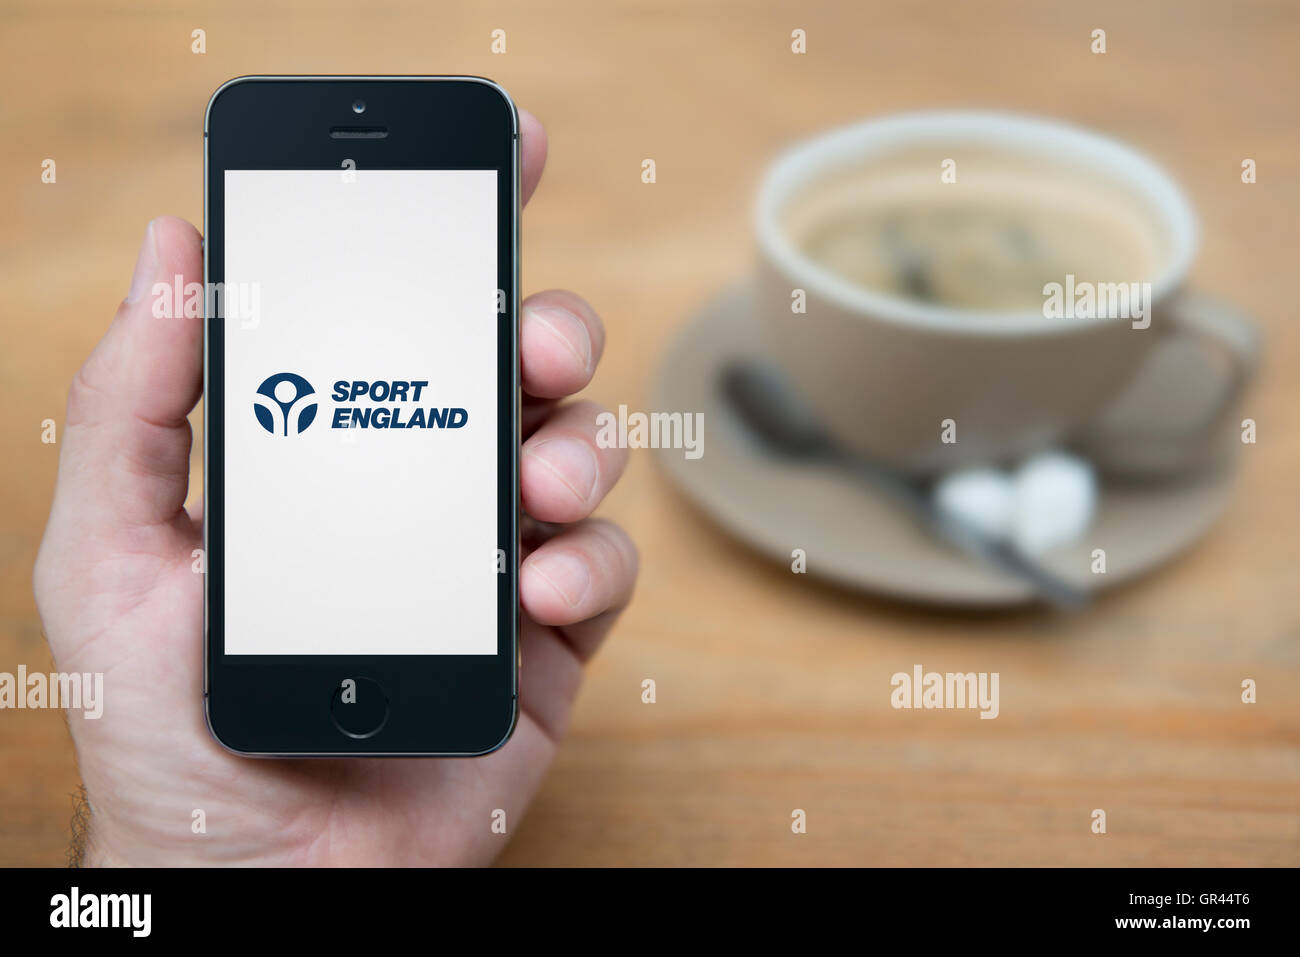 A man looks at his iPhone which displays the Sport England logo (Editorial use only). Stock Photo